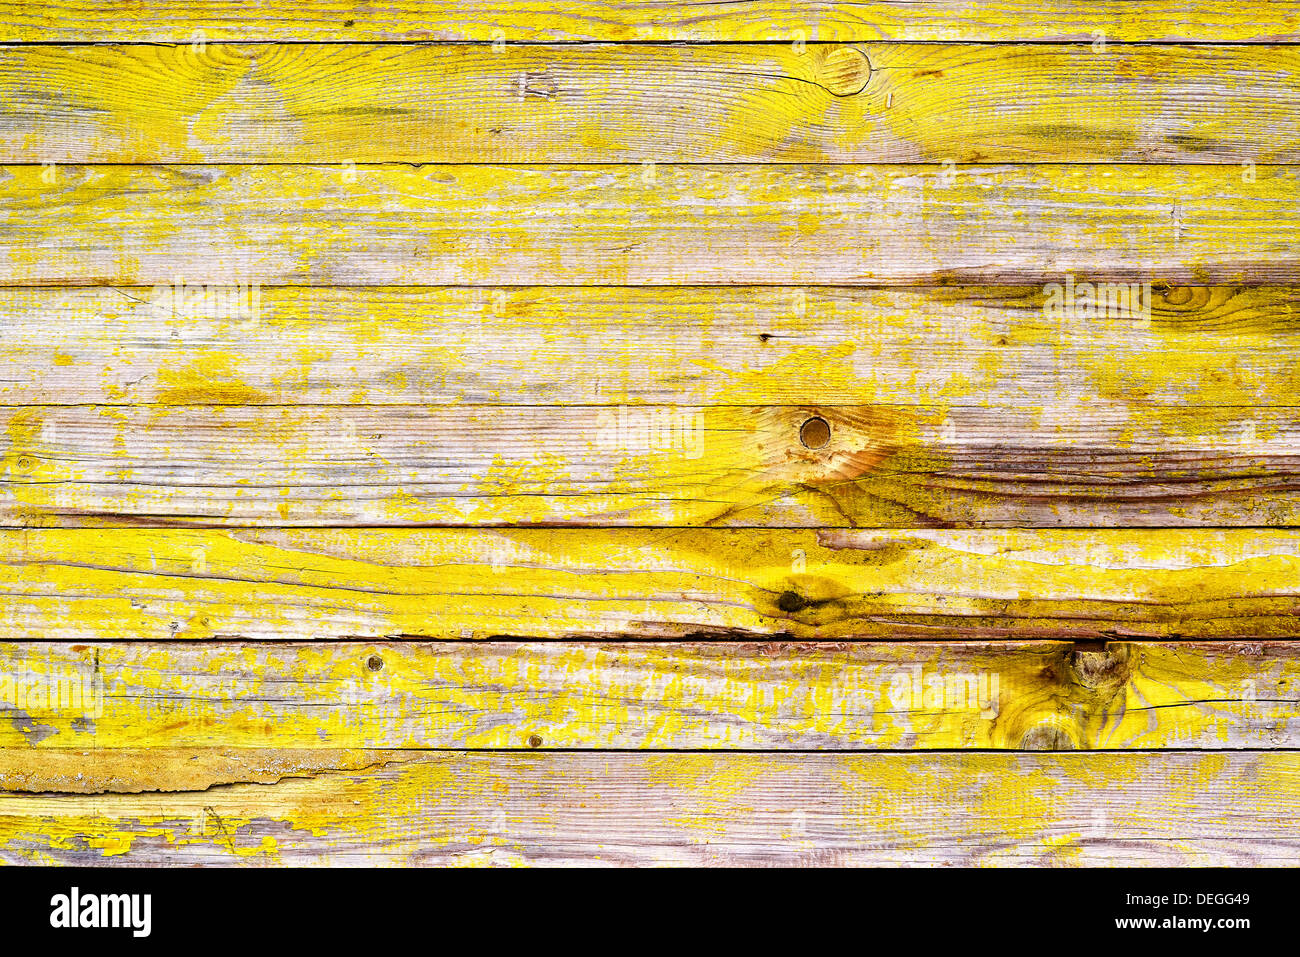 Wood texture background, natural pattern Stock Photo